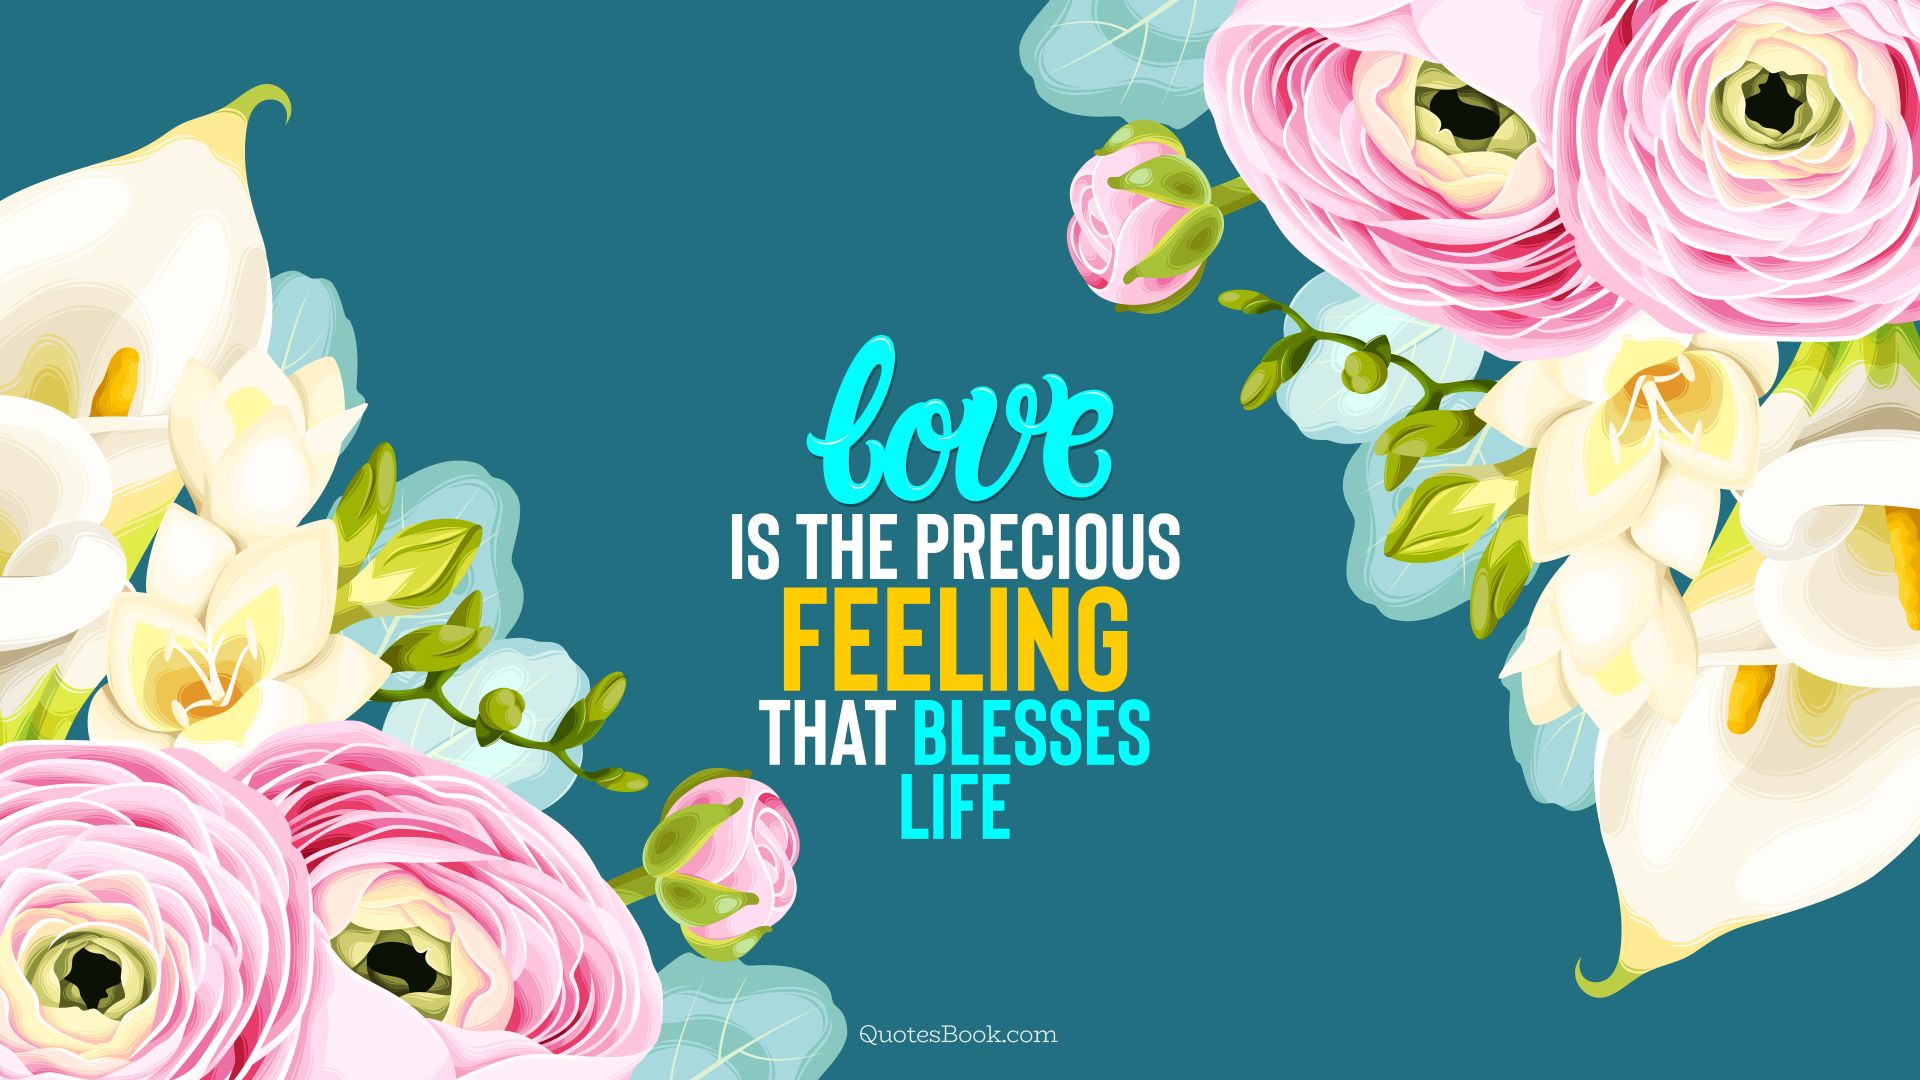 Love is the precious feeling that blesses life